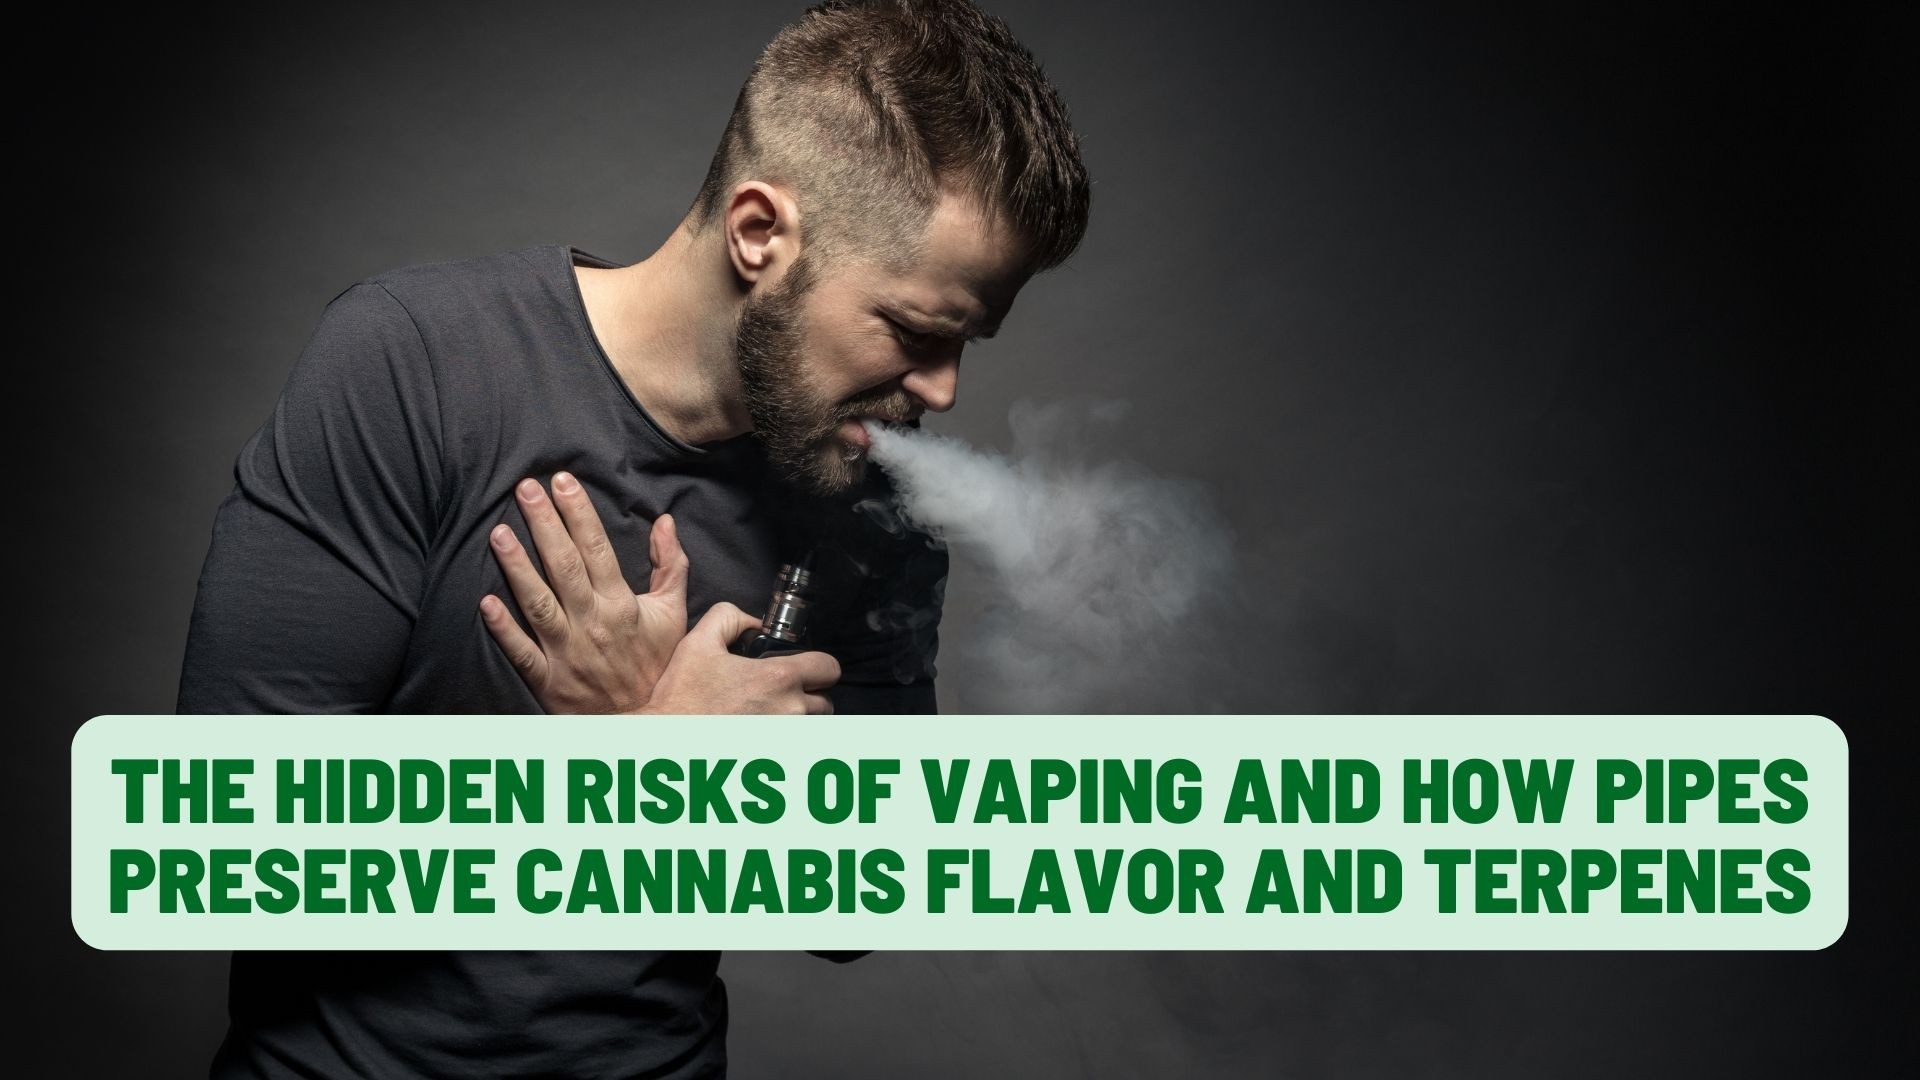 The Hidden Risks of Vaping and How Pipes Preserve Cannabis Flavor and Terpenes